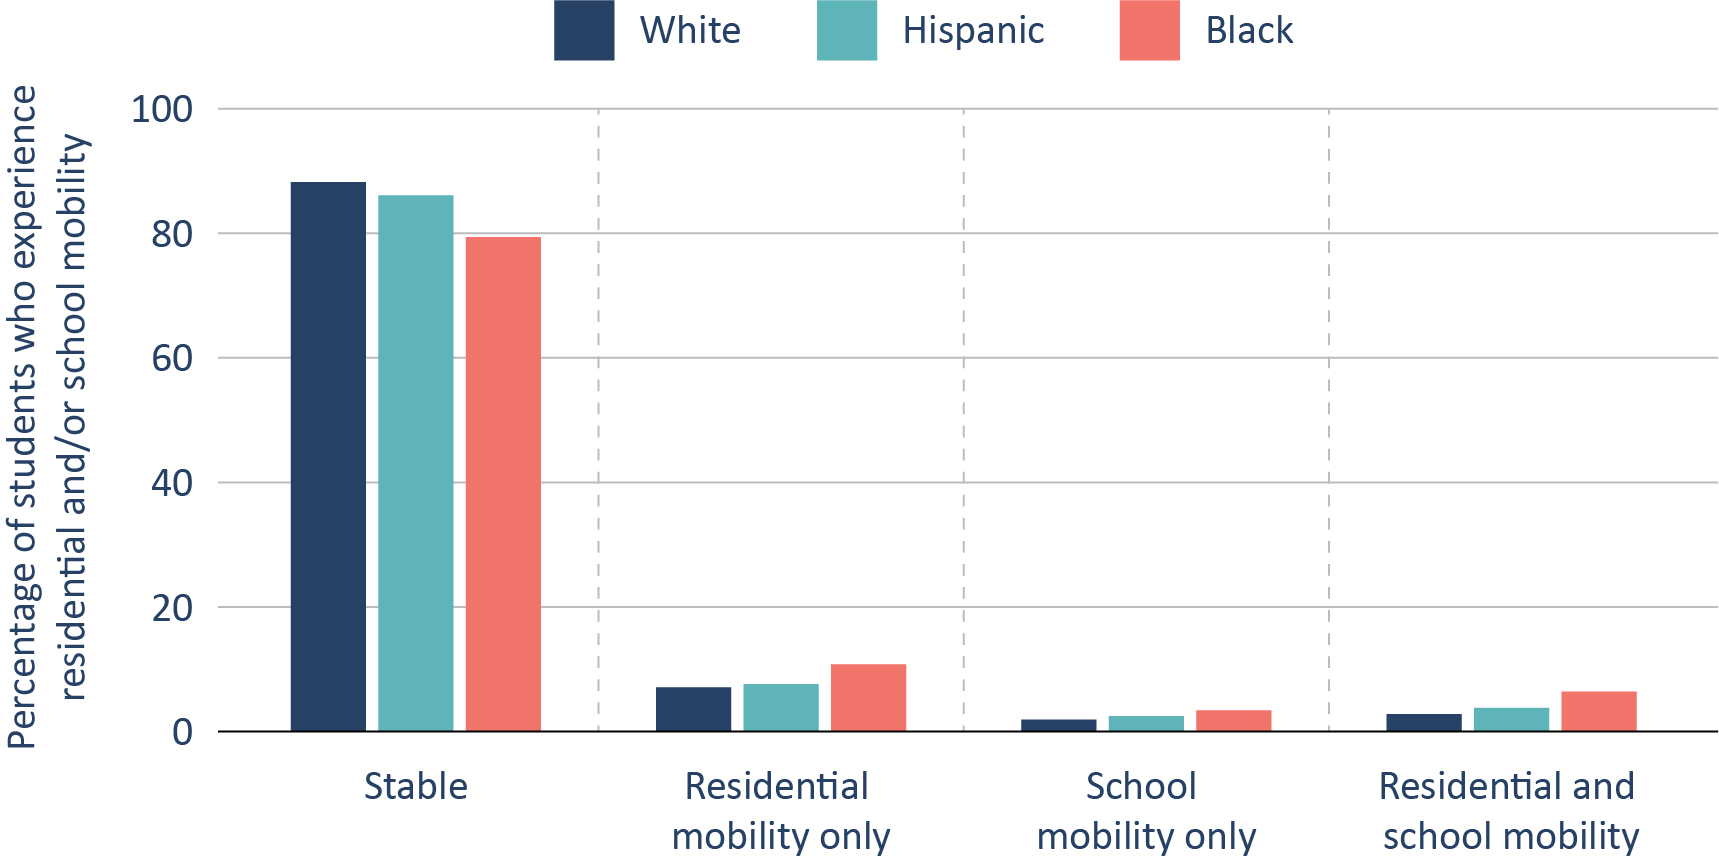 Figure 4. In general, Black and Hispanic students are more mobile than White students.